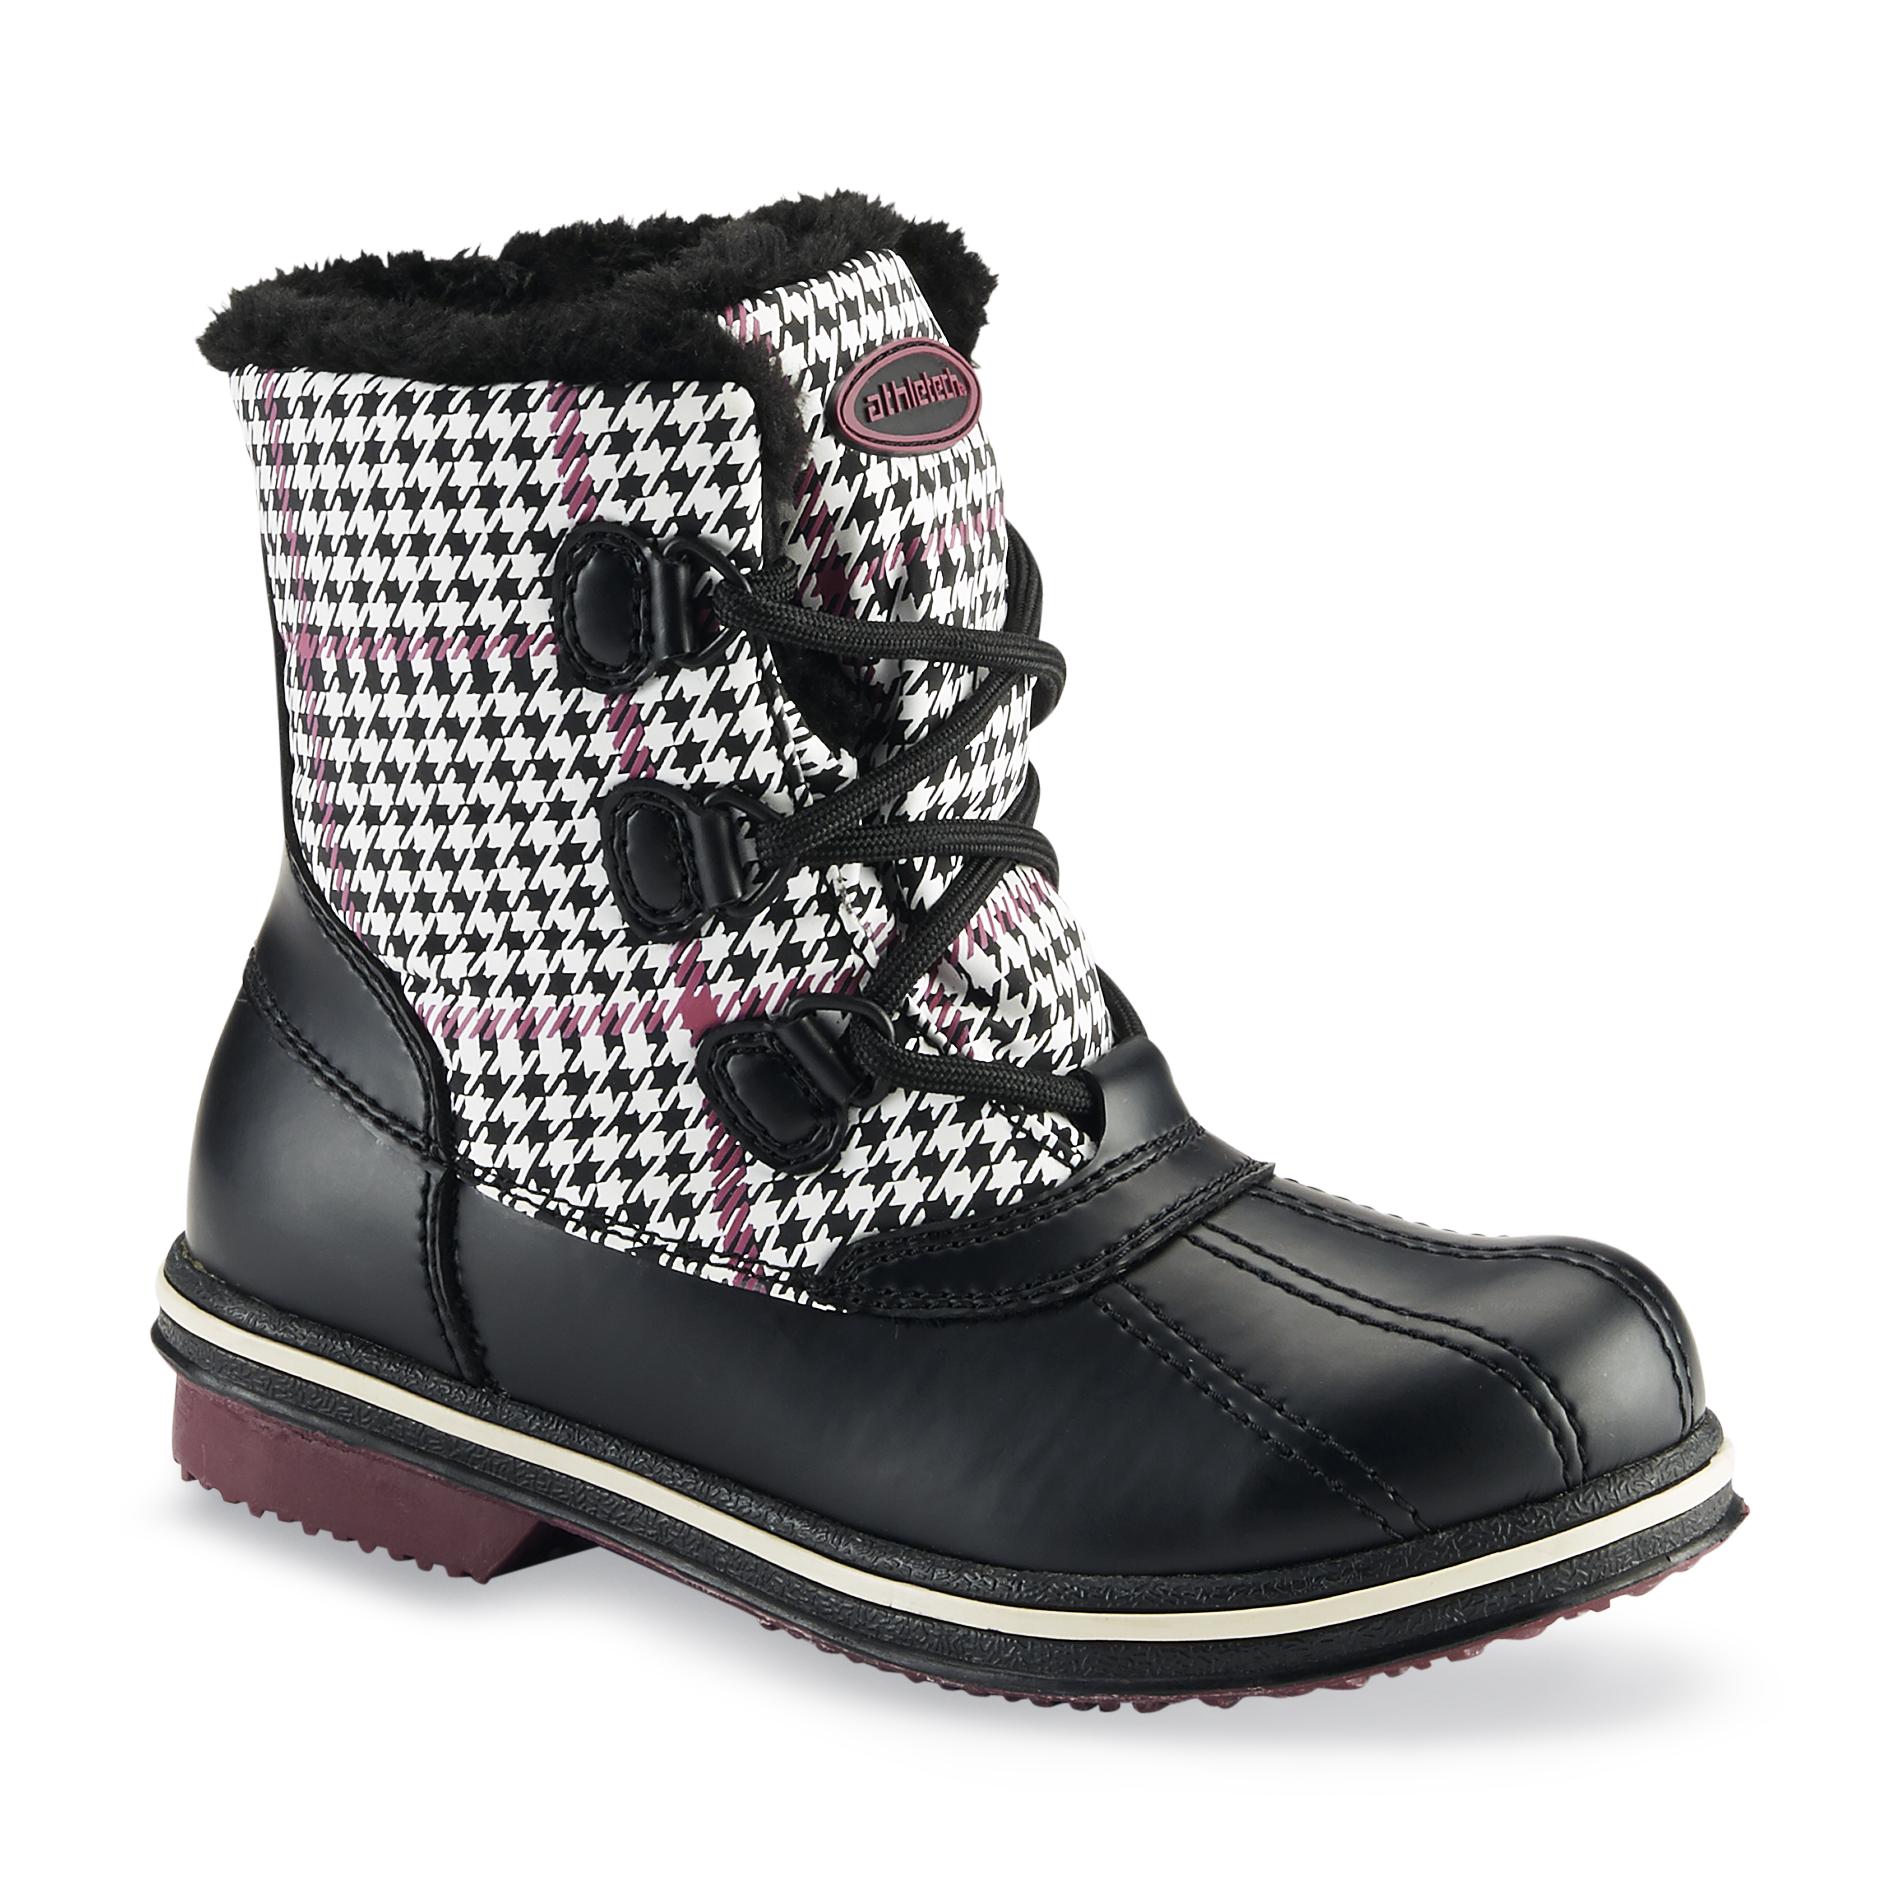 Athletech Women's Queenie Black/Houndstooth Check Ankle-Height Duck Boot